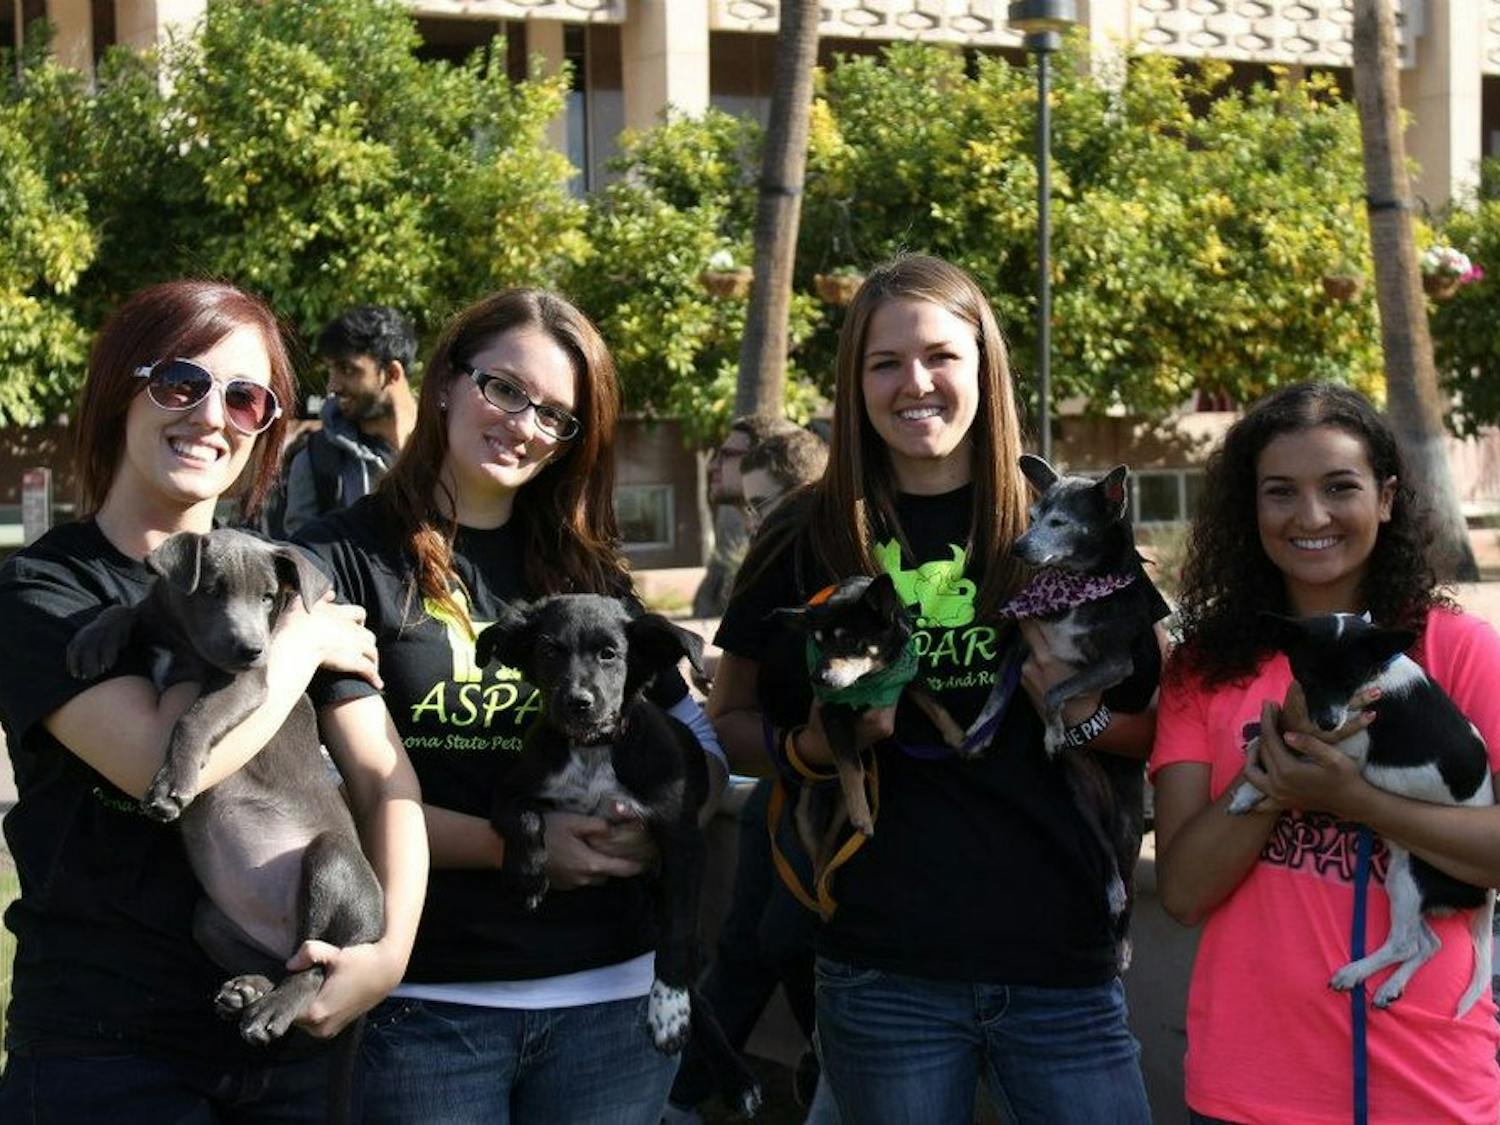 RAWR, a club at ASU, aims to connect students to volunteer opportunities and help find good homes for animals in need. ASU graduates Kyrie Martin, Melody Kauffman, Megan Budday and senior Melissa Jordan pose at the 'Paws your Finals Stress' event near Hayden Library in Tempe in 2012.